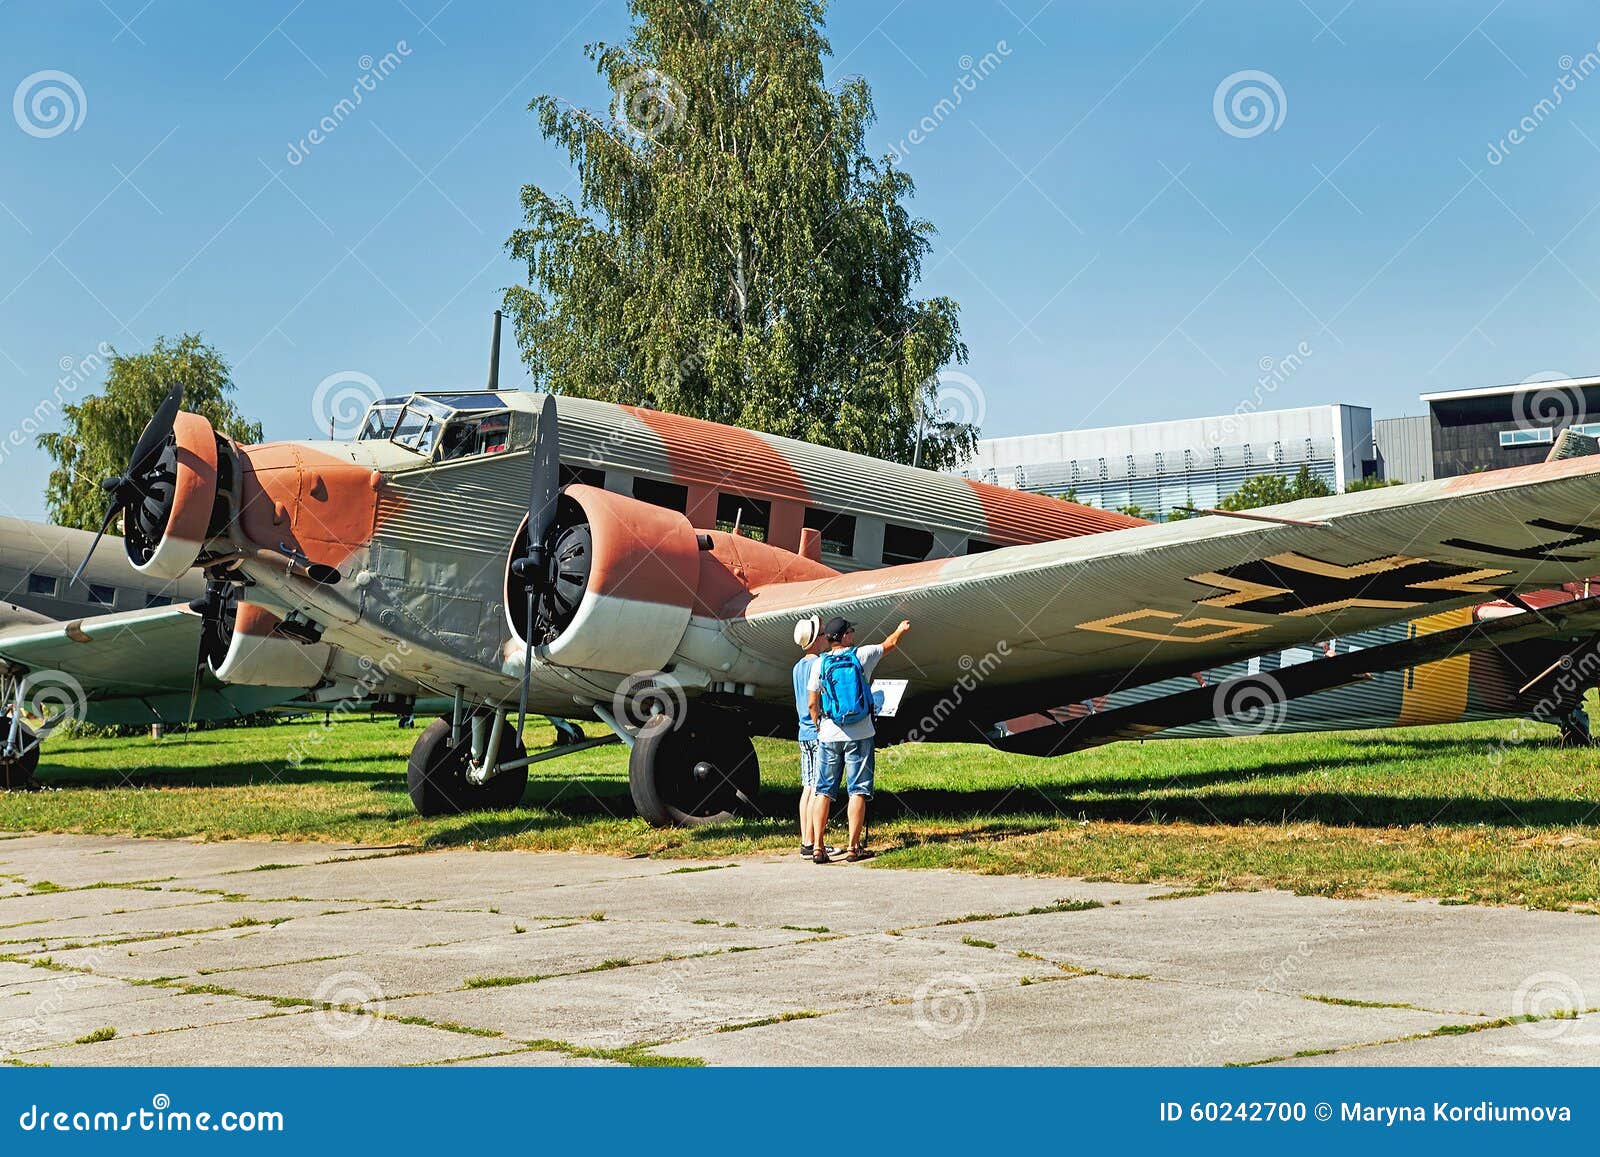 Krakow, Poland - August 30, 2015: Museum Of Aviation. People Near Plane (aircraft). Editorial ...